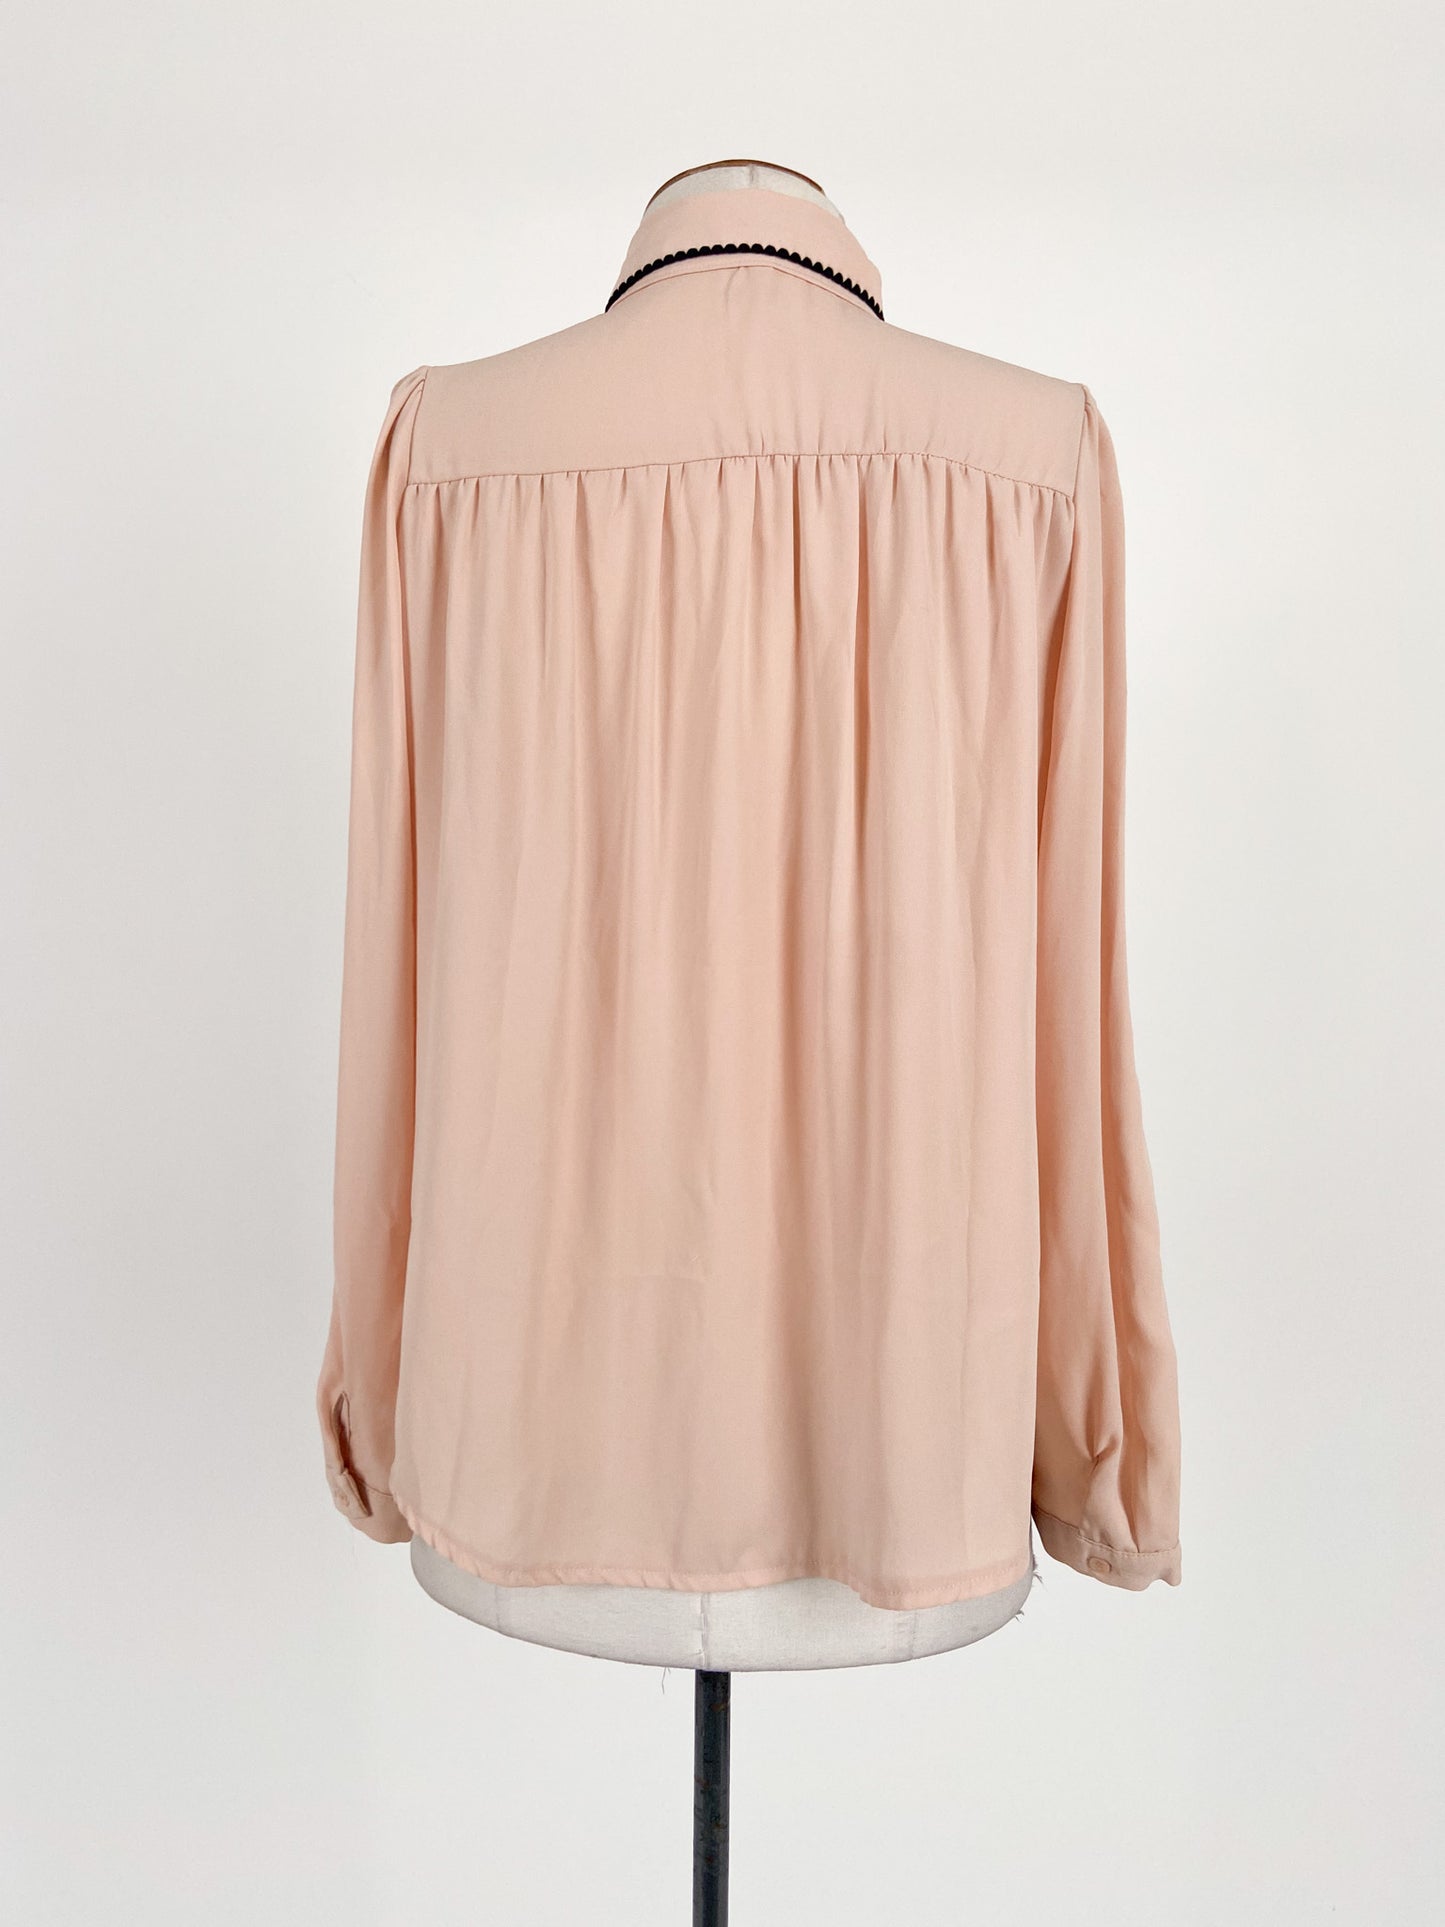 May | Pink Casual/Workwear Top | Size XS